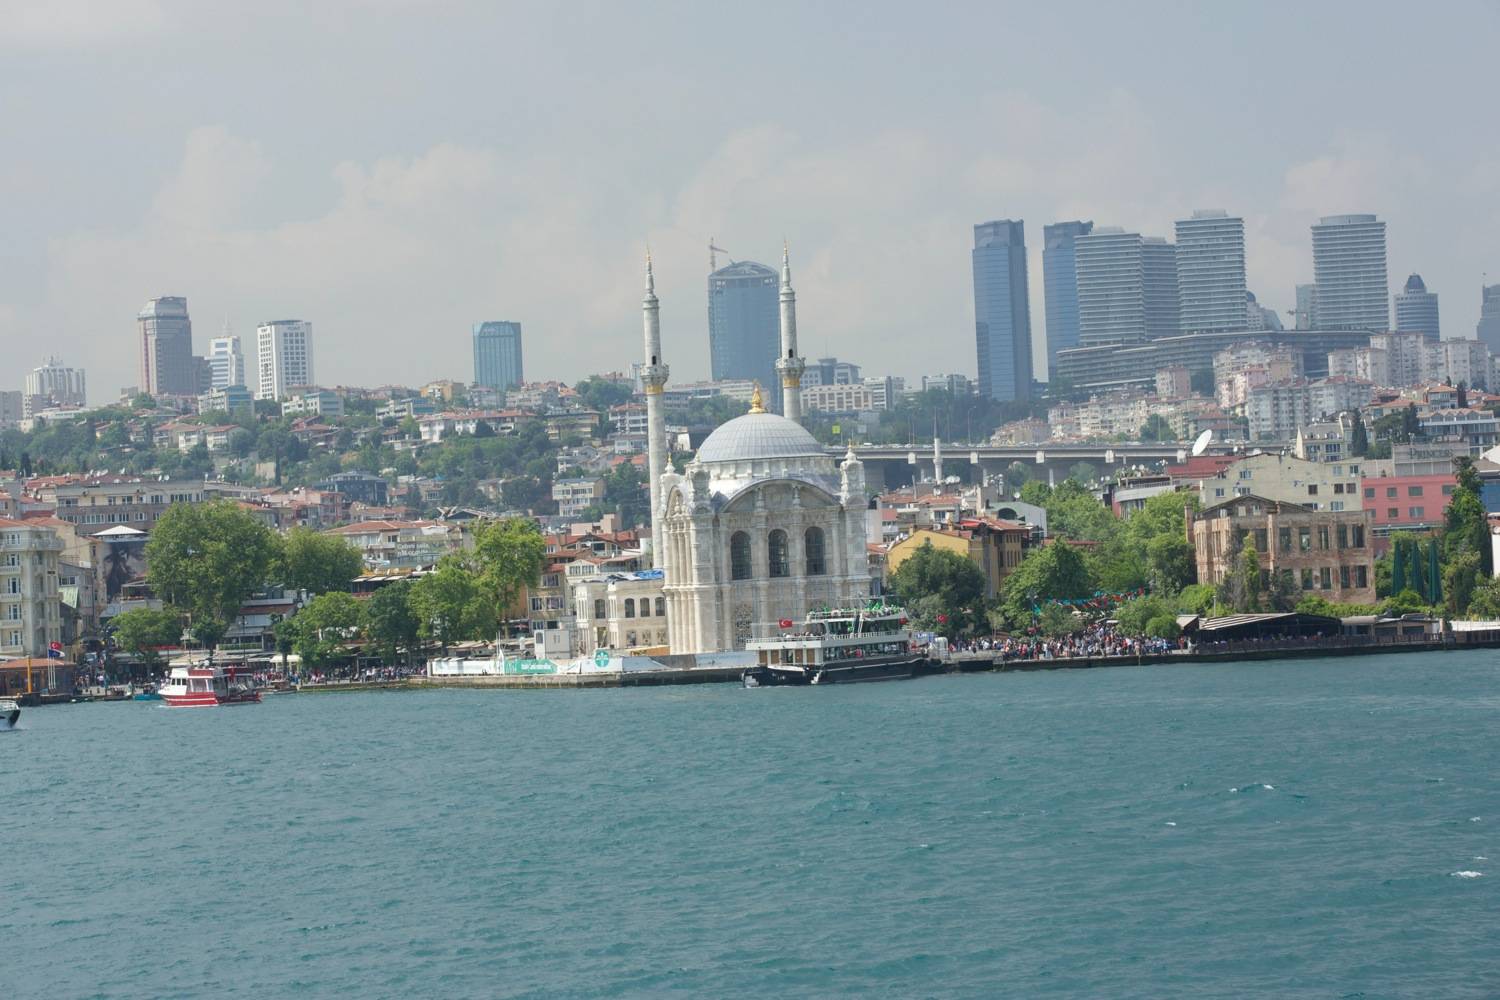 Mosque within the Istanbul cityscape, viewed from the straits